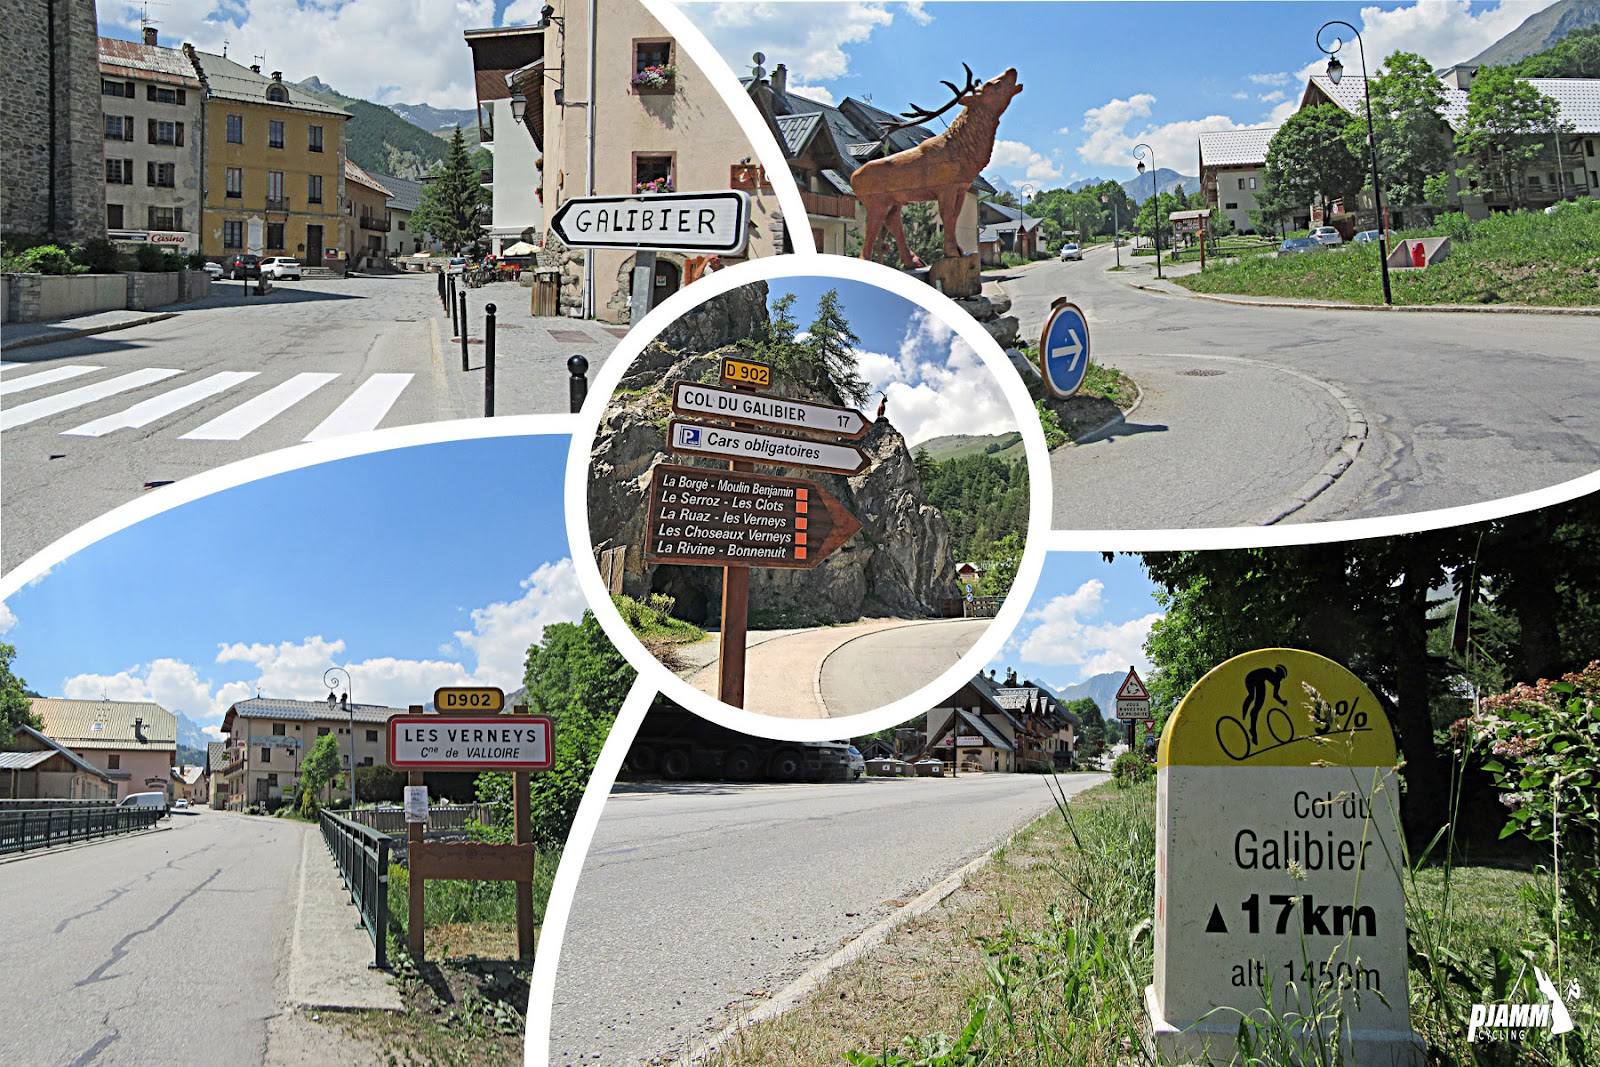 Cycling Col du Galibier from Valloire: photo collage, signs for Galibier, KM marker, large statue of elk